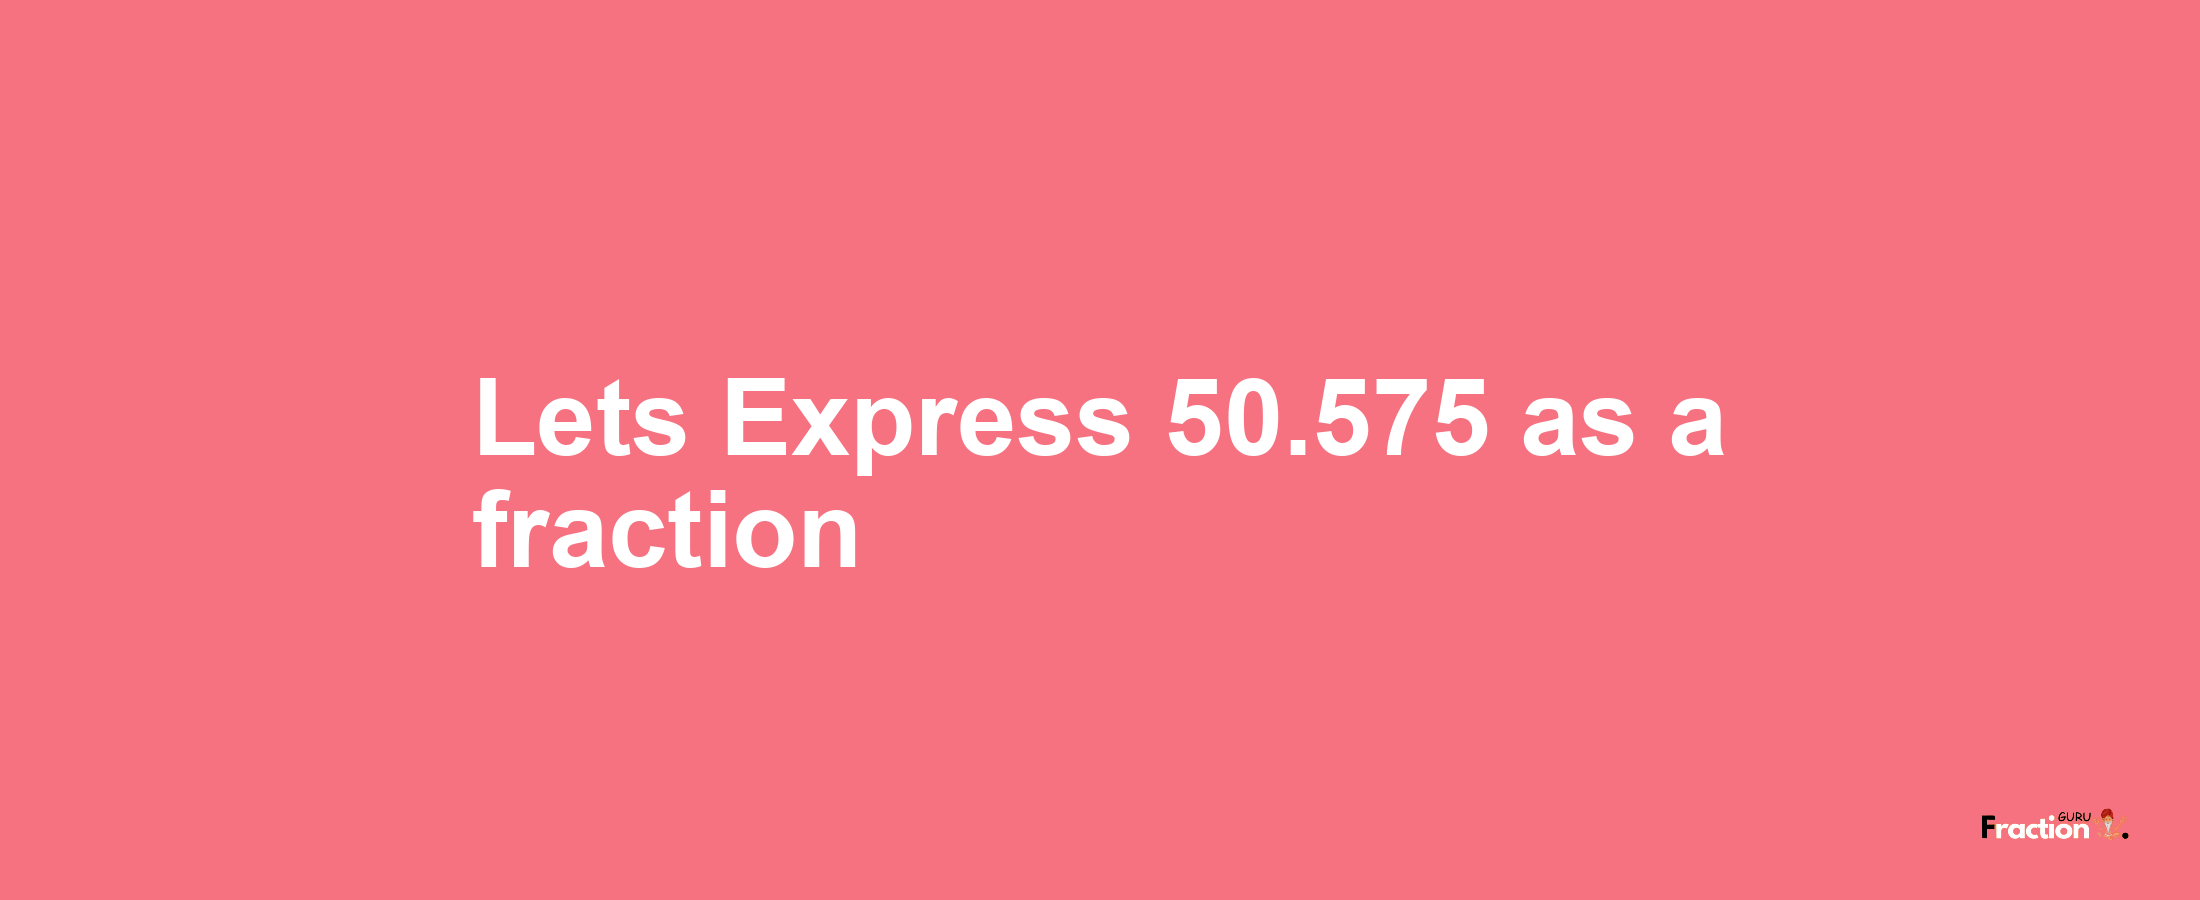 Lets Express 50.575 as afraction